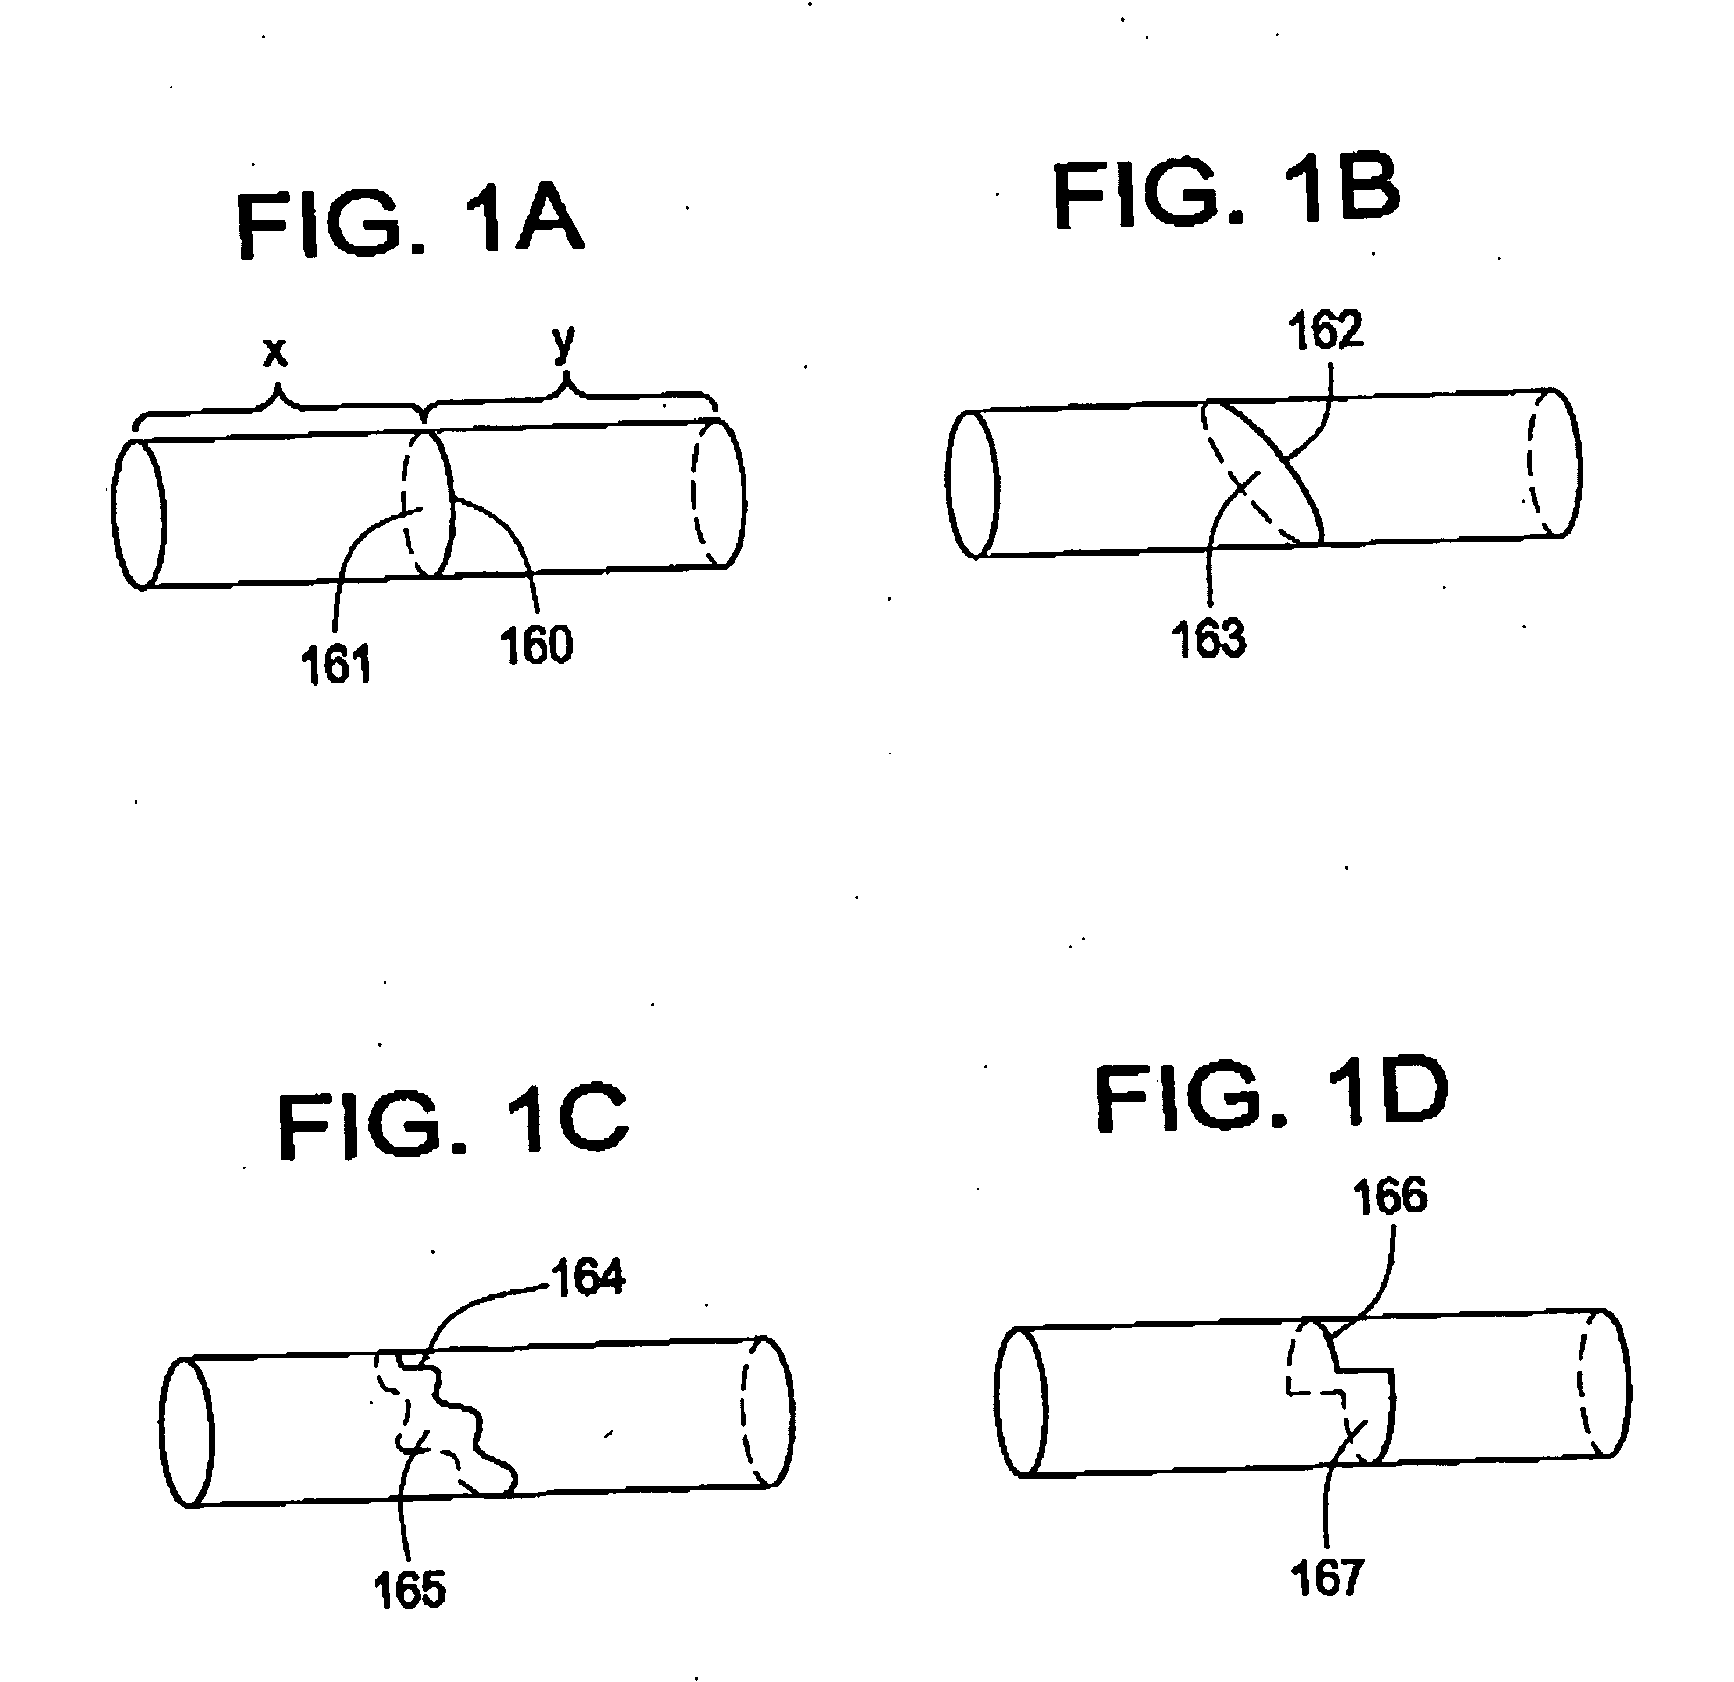 Ablation device with phased array ultrasound transducer